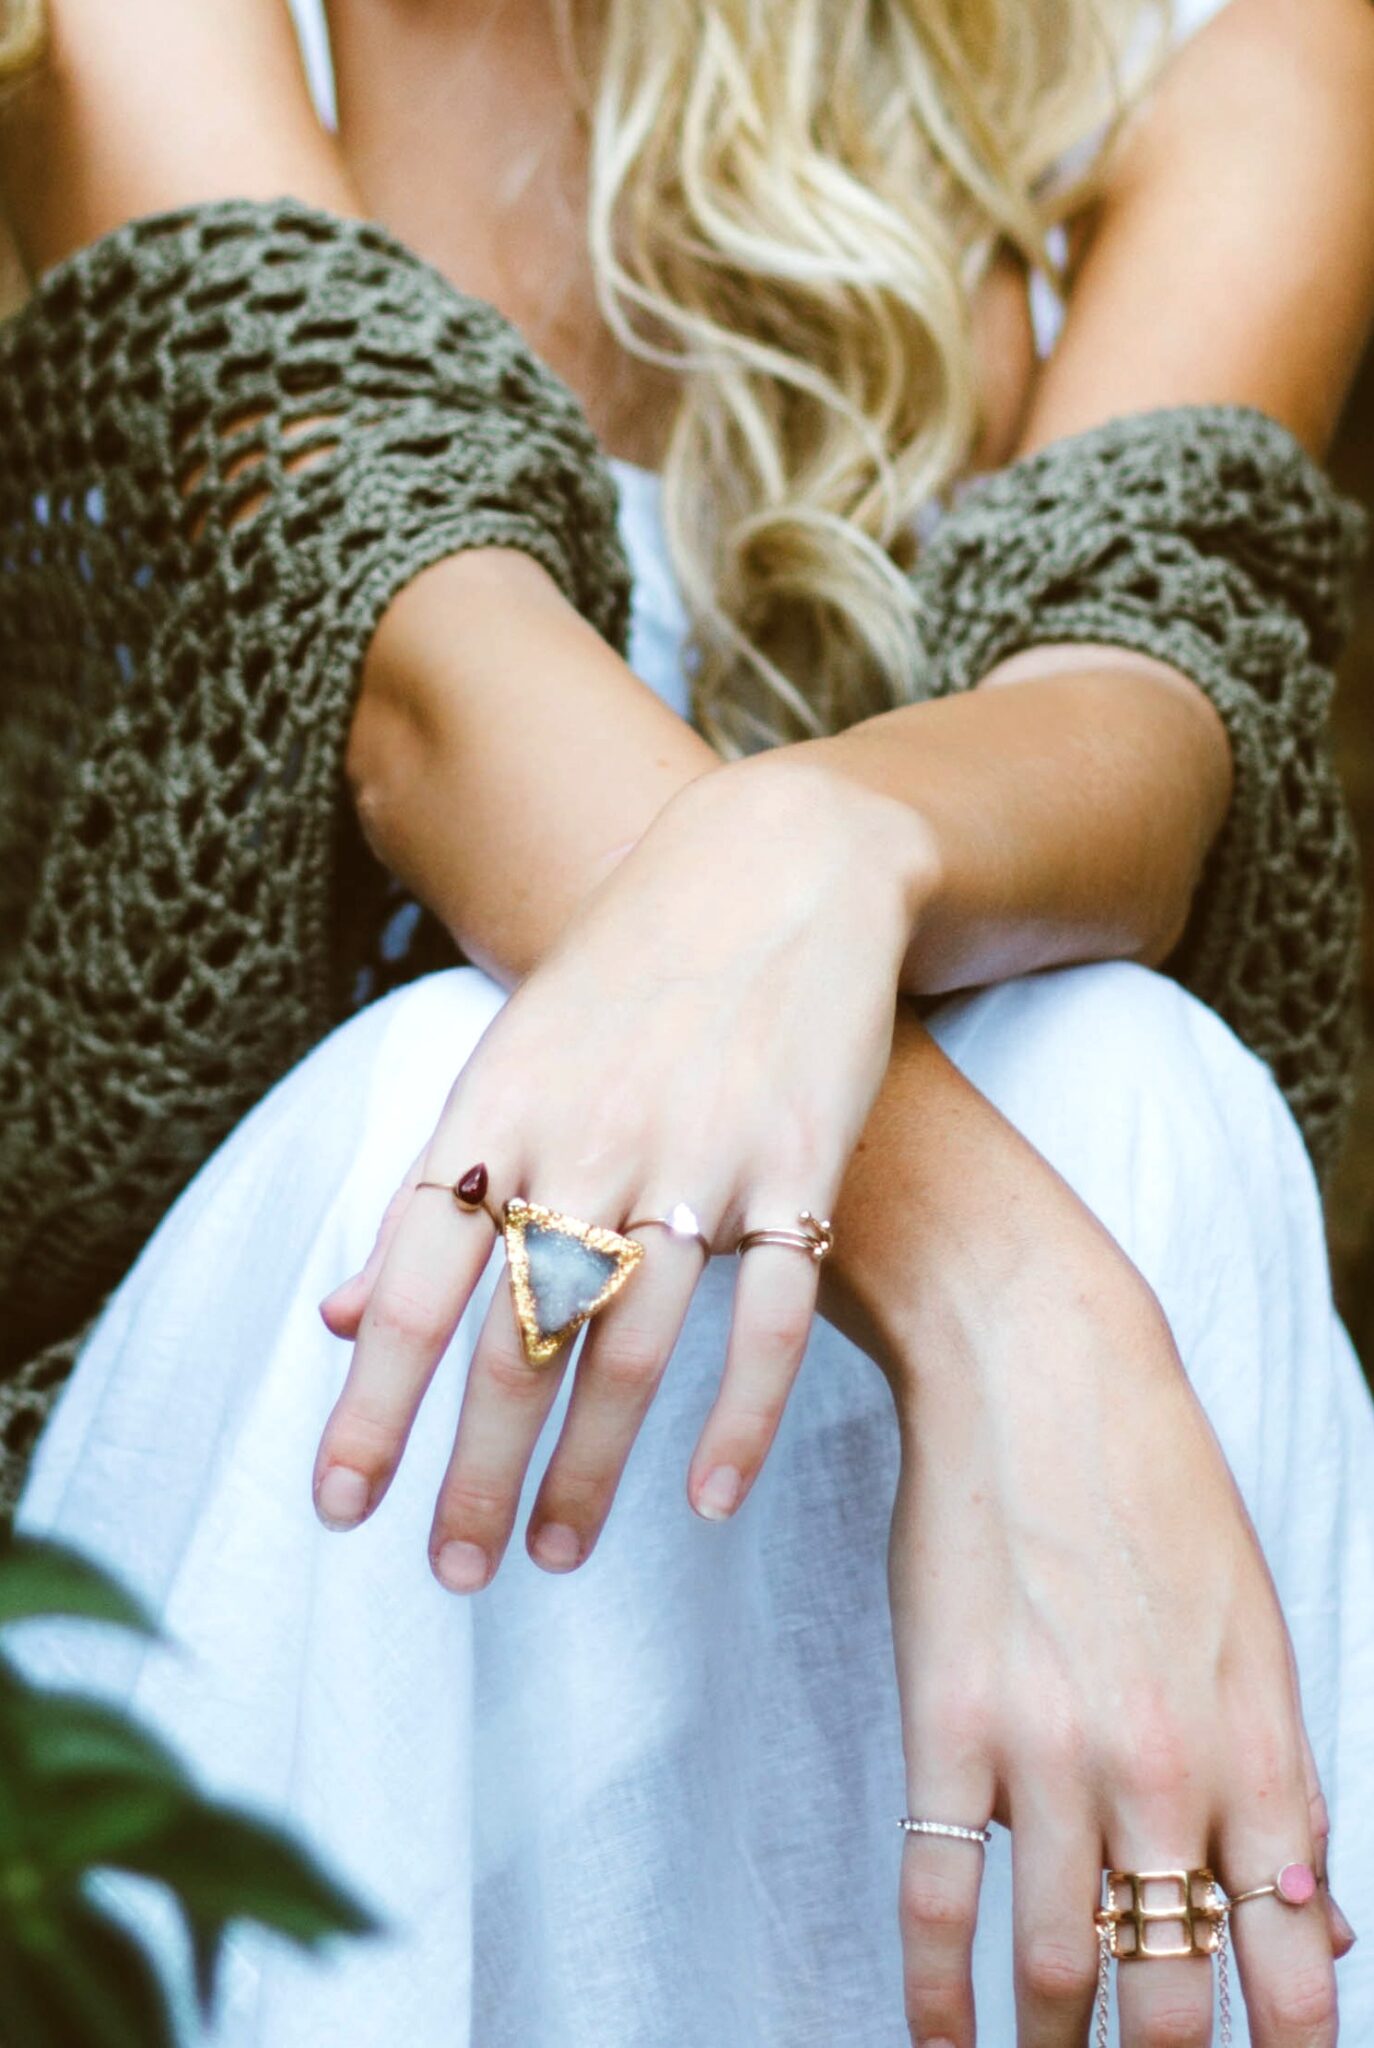 The Lowdown on Making a Statement With Statement Rings